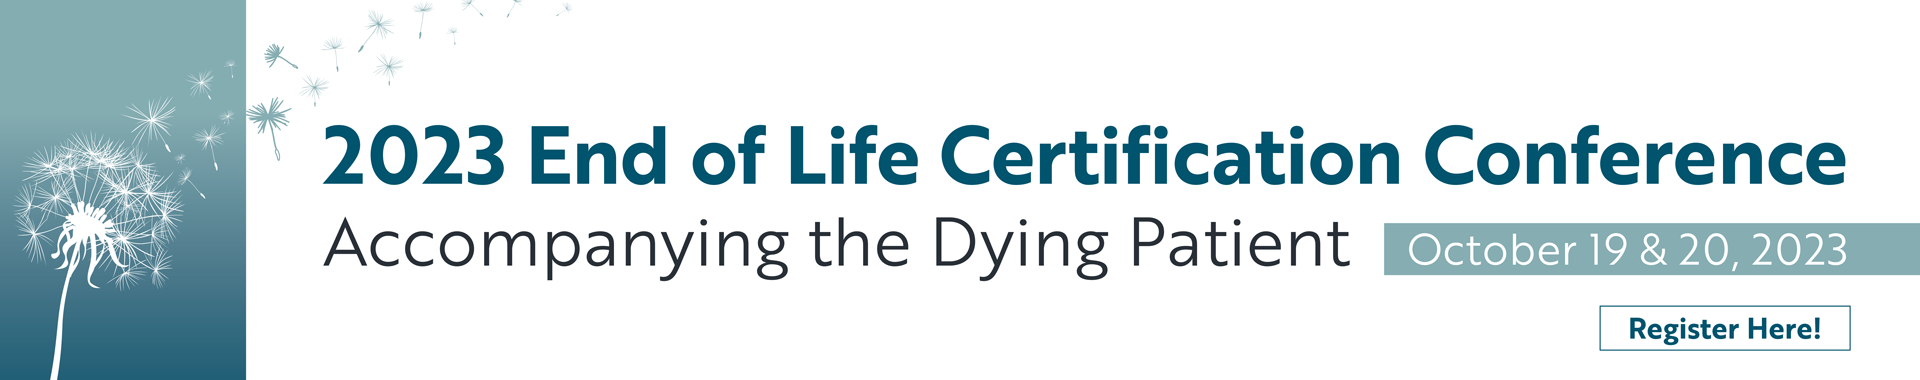 2023 End of Life Certification Conference: Accompanying the Dying Patient